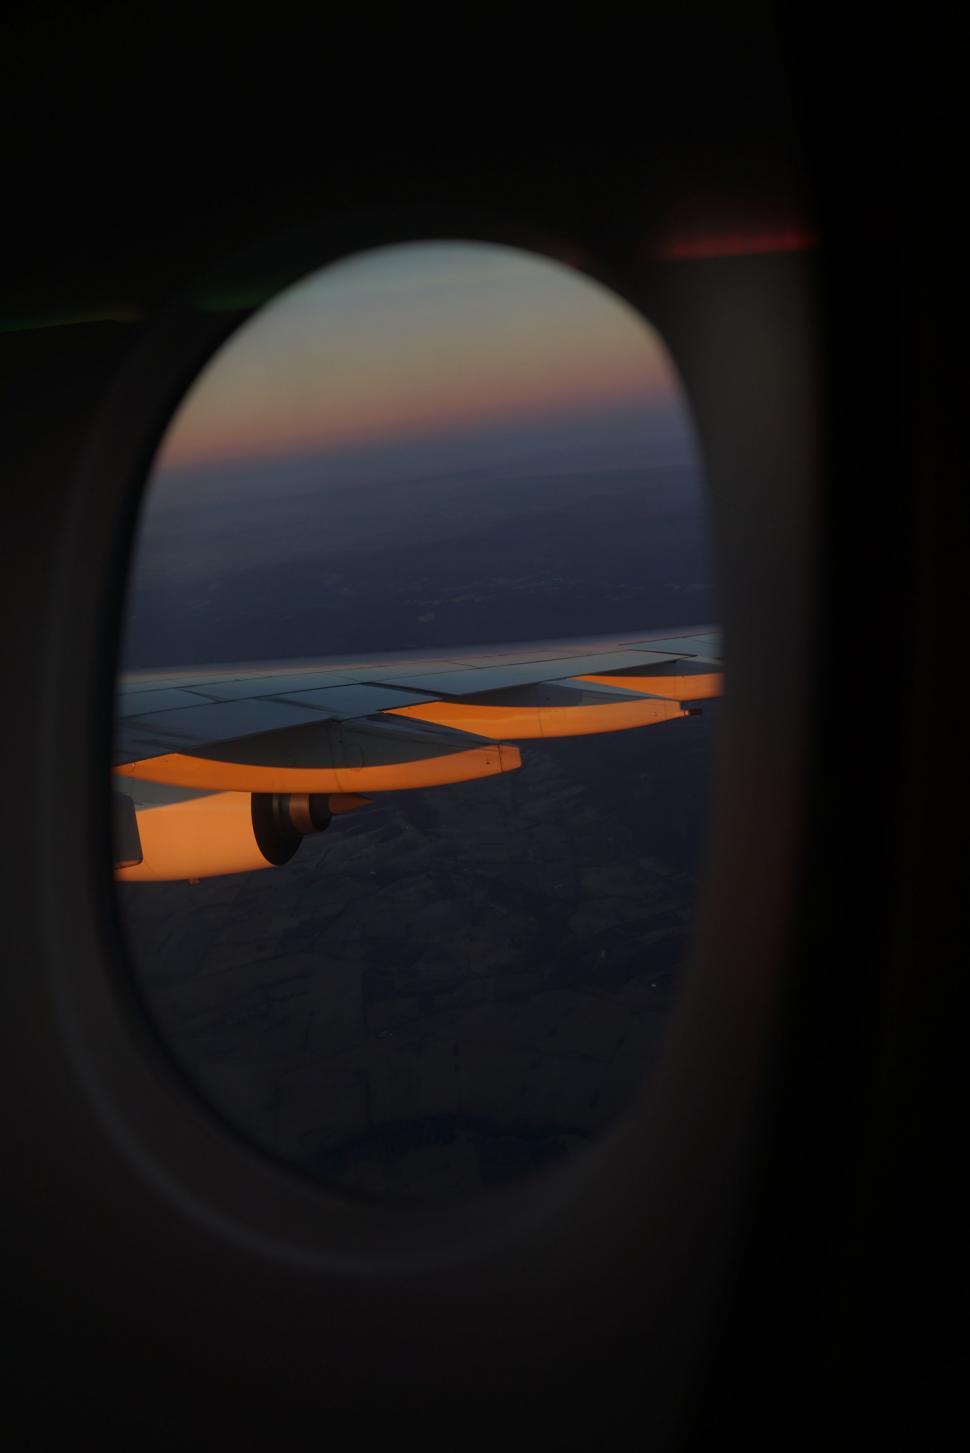 Free Image of A View of the Wing of an Airplane Through a Window 